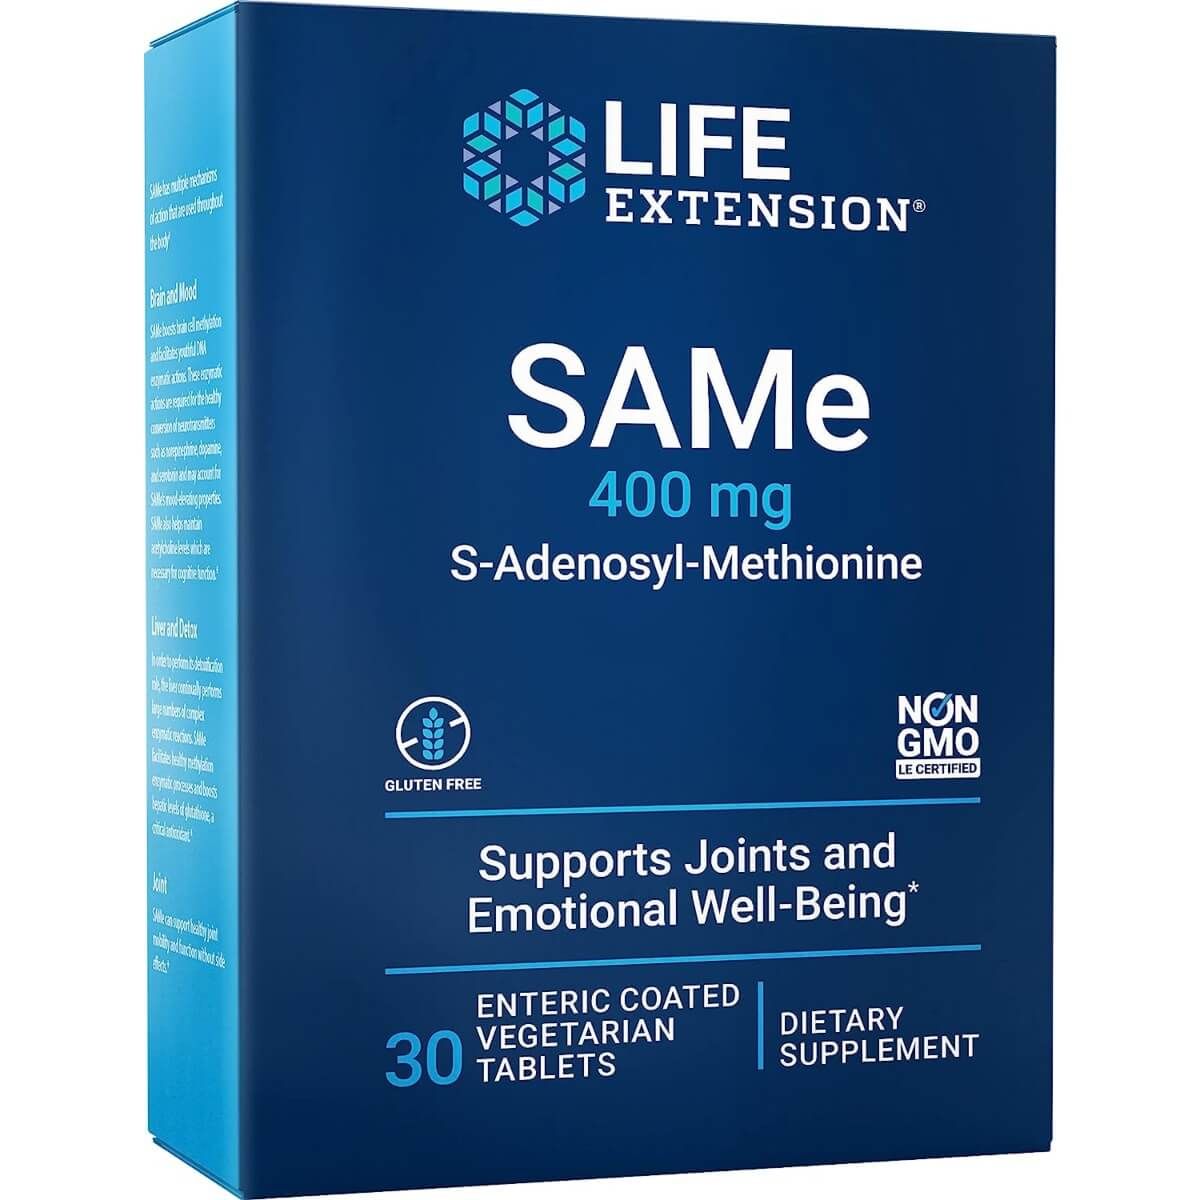 Photos - Vitamins & Minerals Life Extension SAMe 400 mg 30 enteric-coated Vegetarian Tablets PBW-P34838 